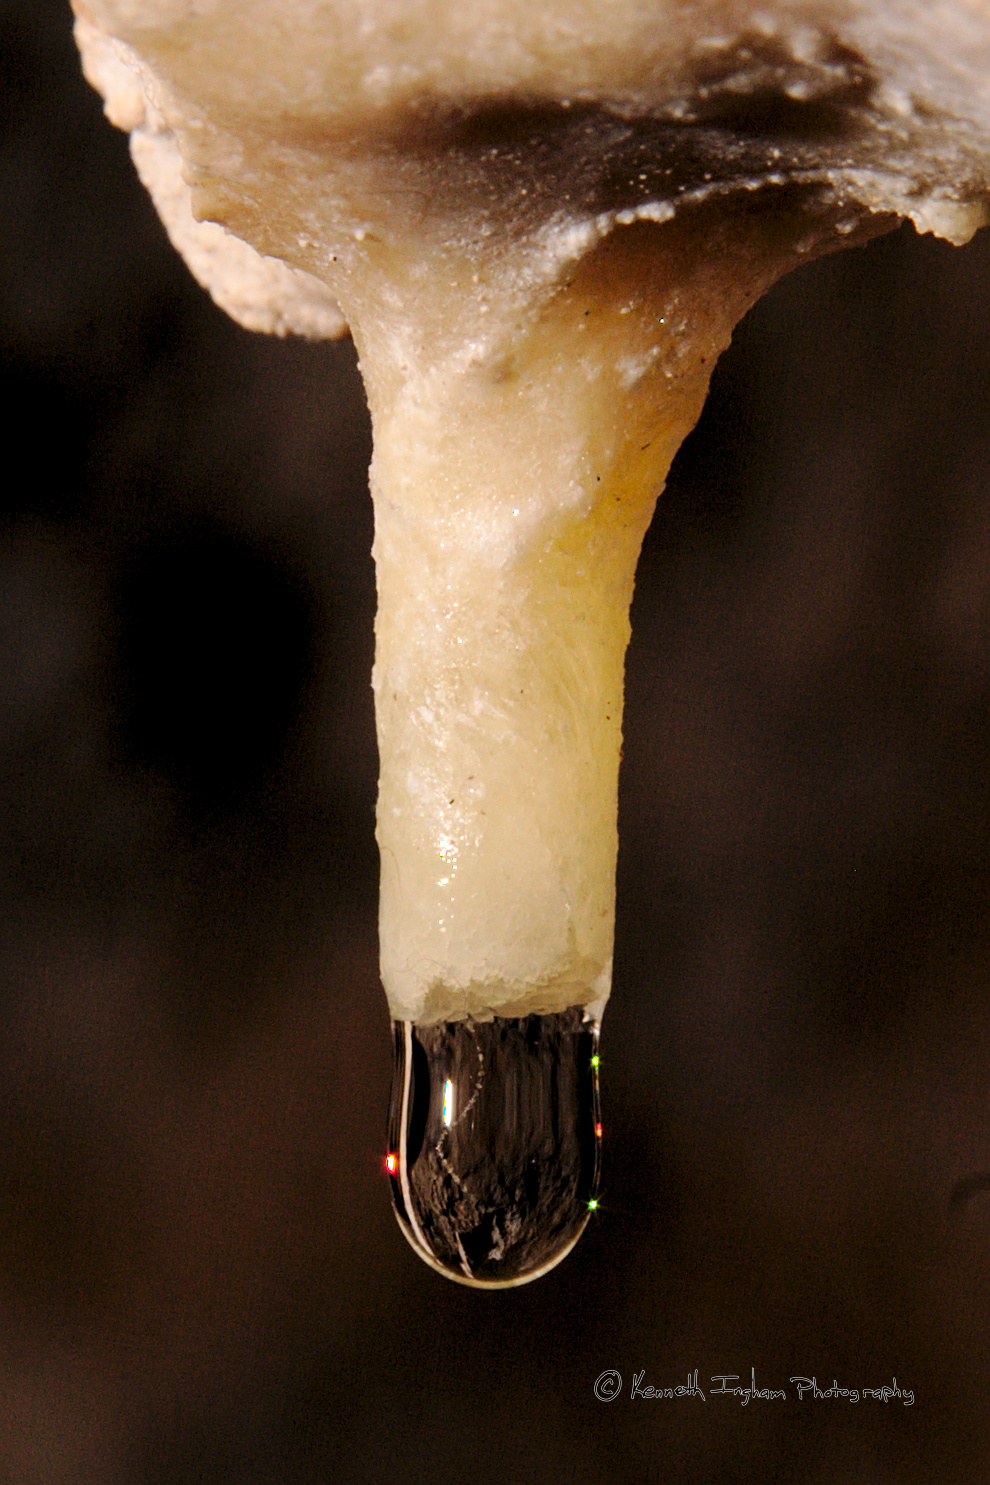 Soda straw with drip on end that contains filament with beads of